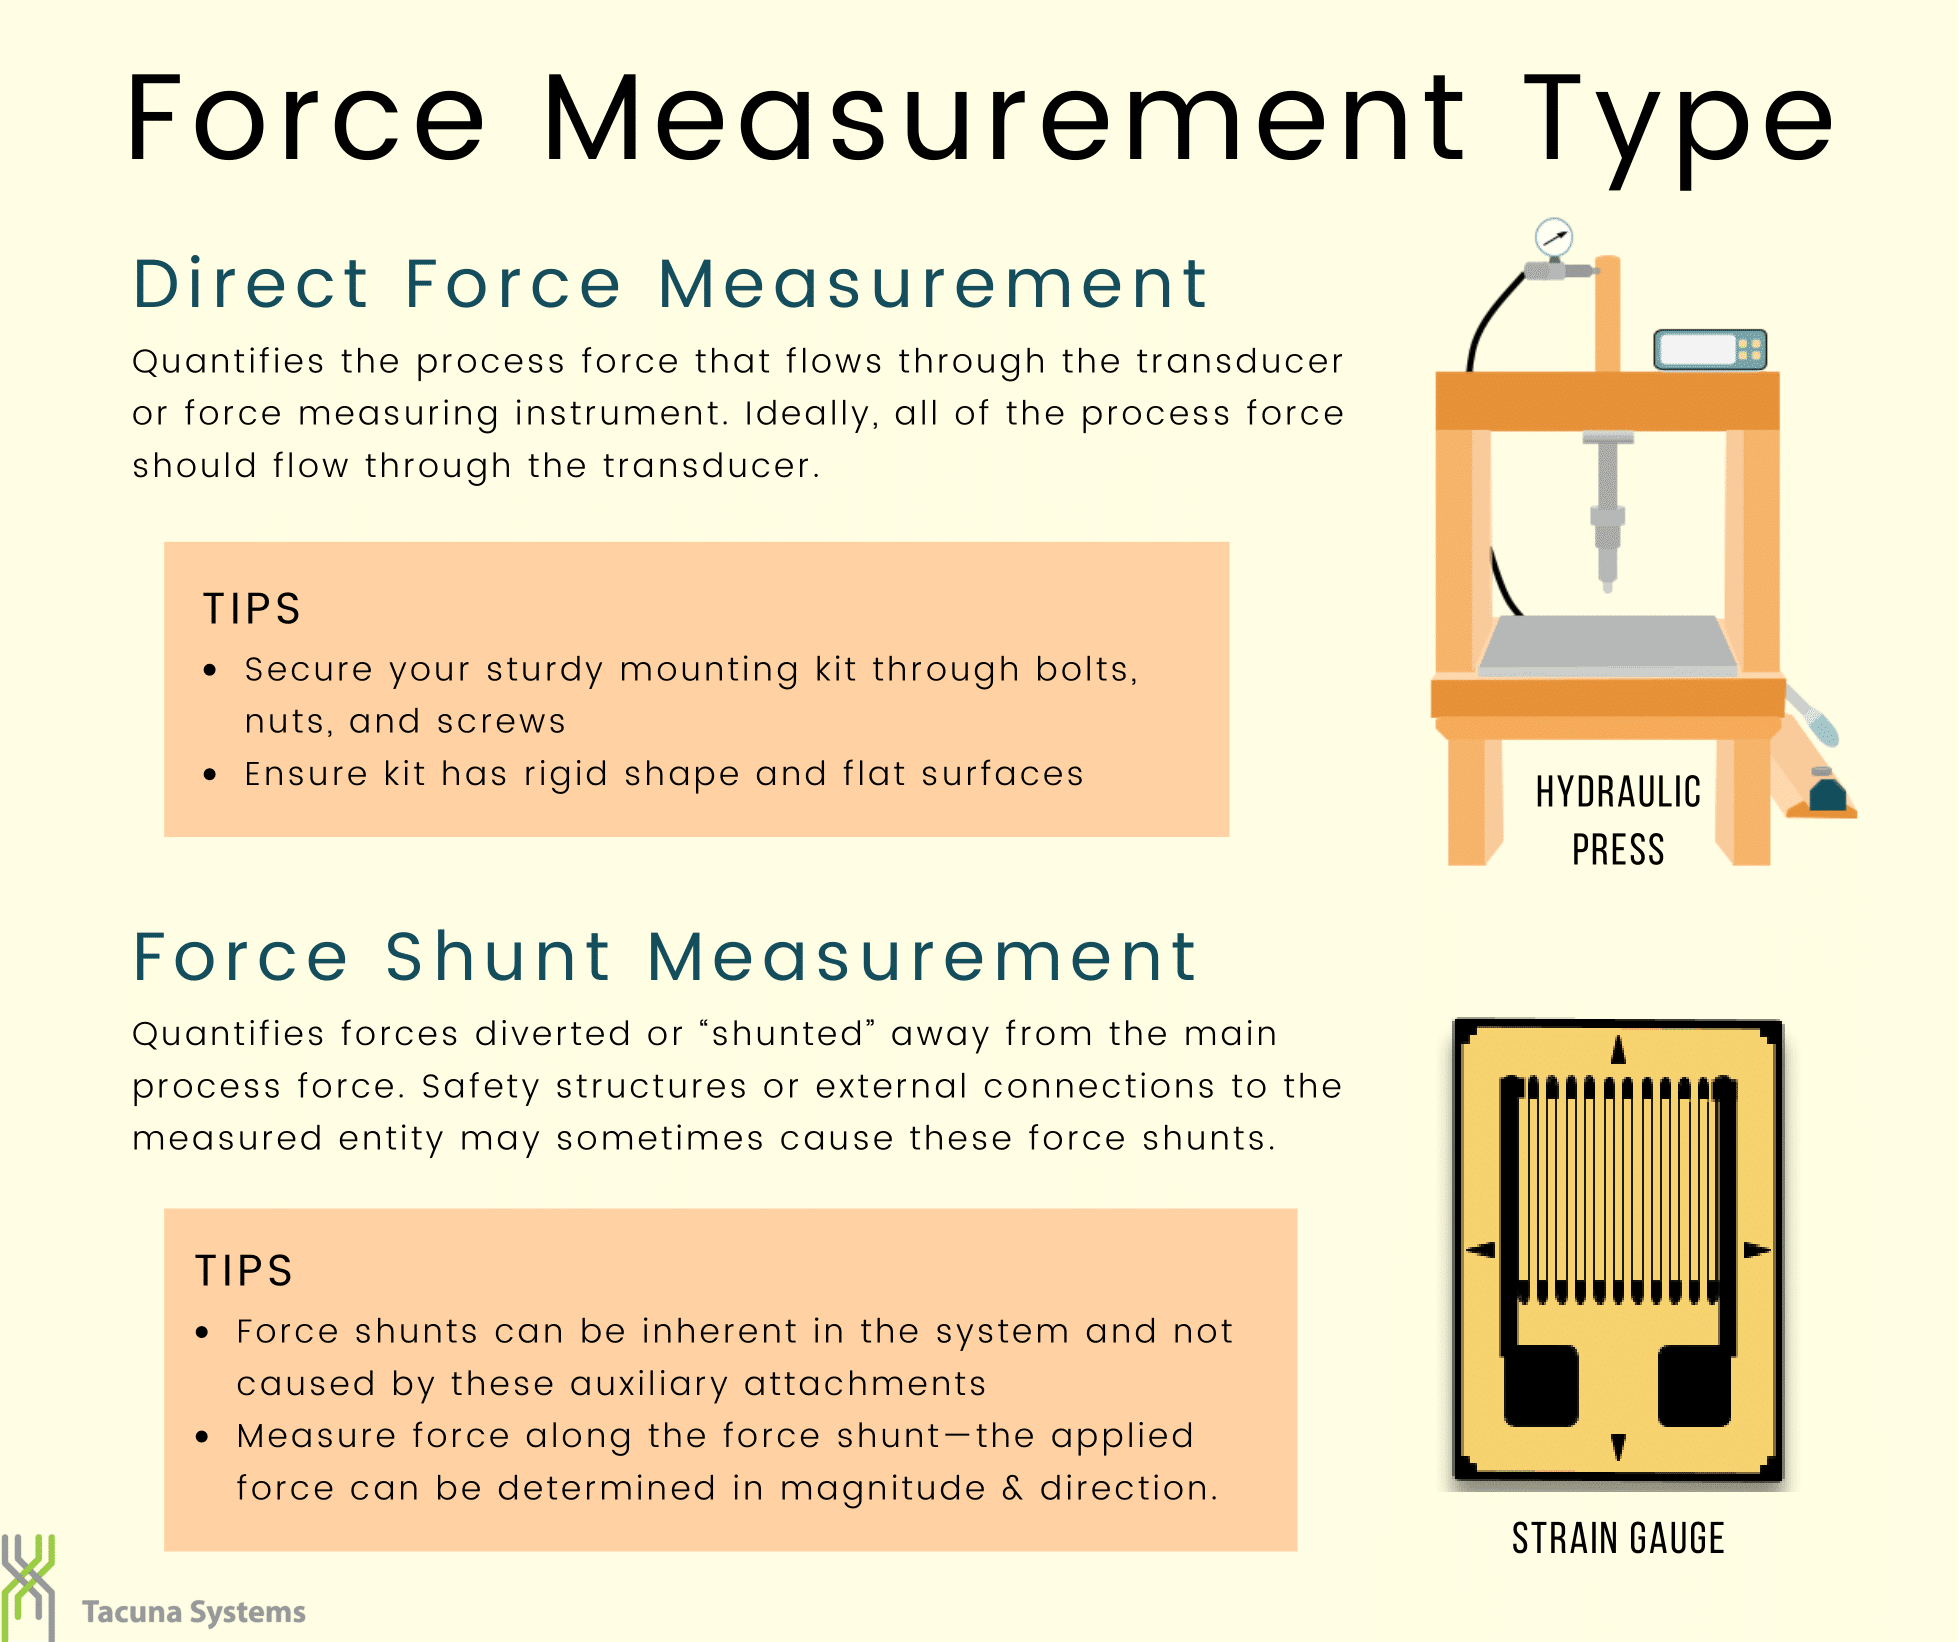 Force Measurement Types: Direct Force and Force Shunt Measurement